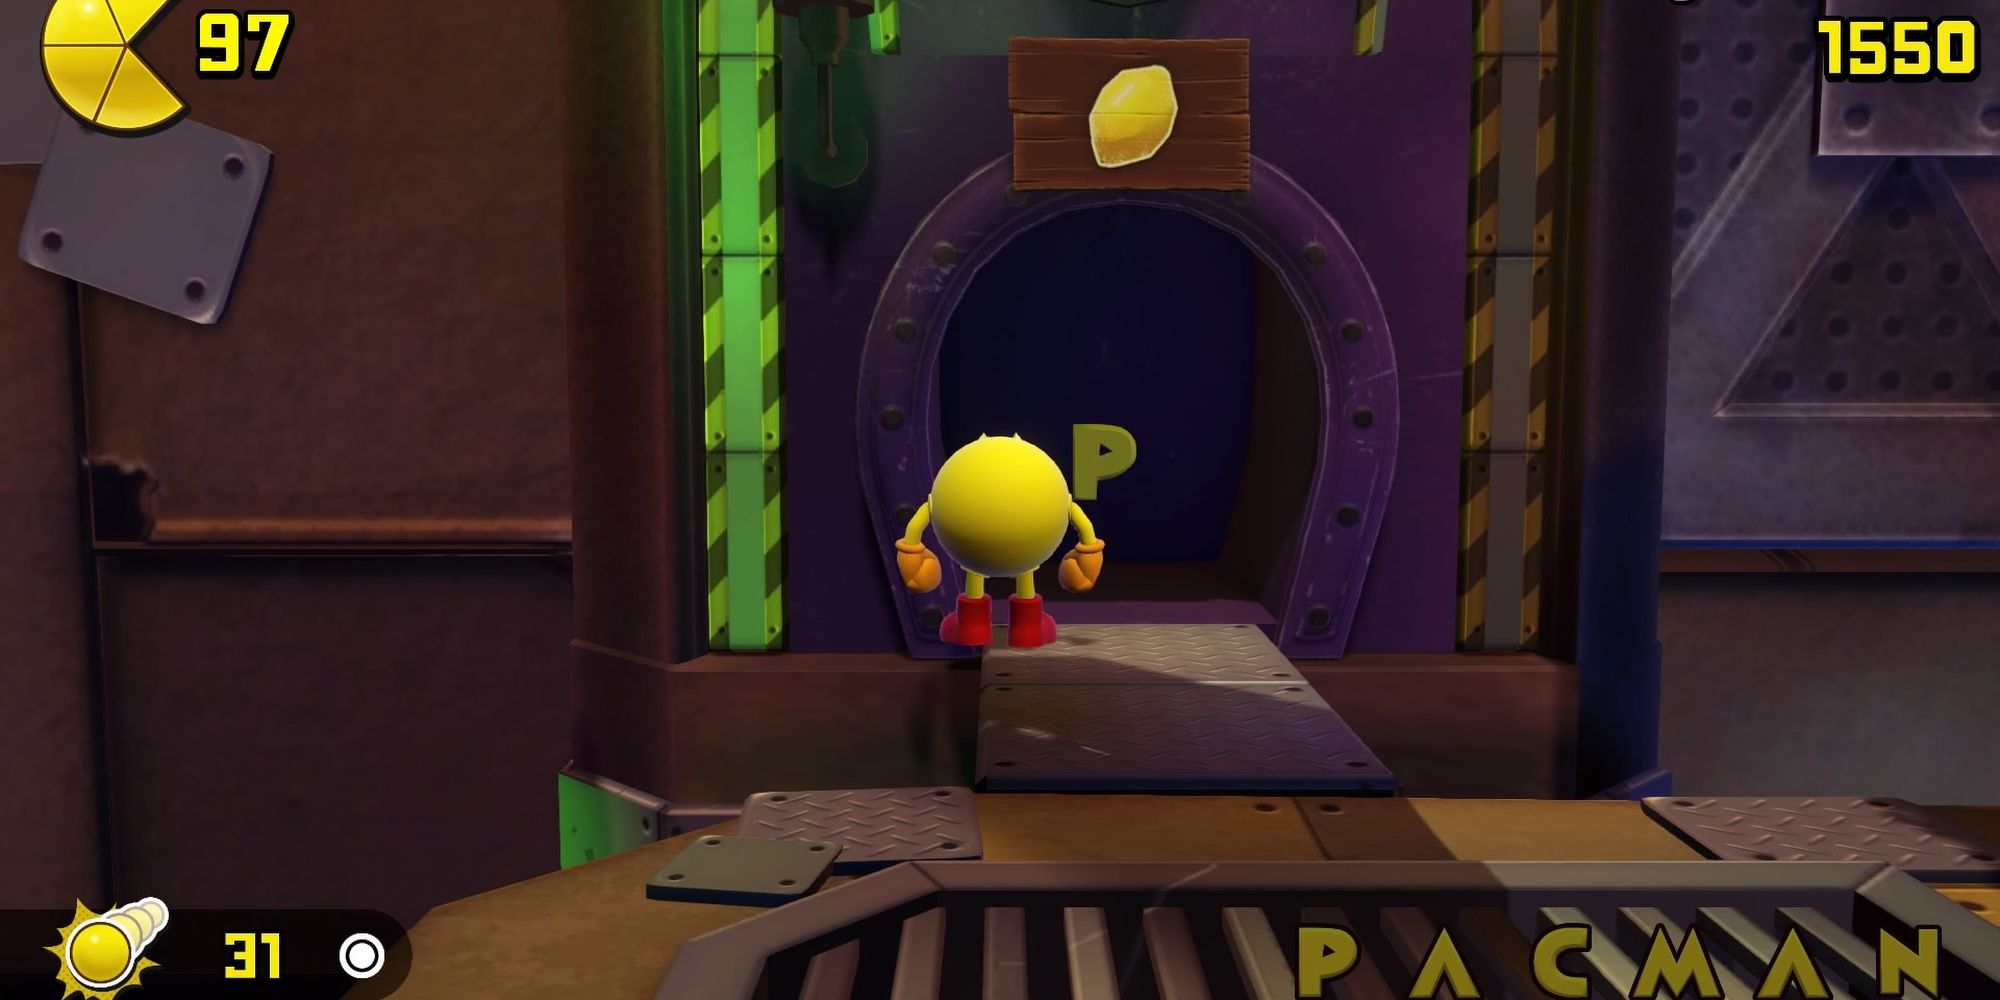 Pac-Man with a letter P, one of the many collectibles in Pac-Man World Re-Pac